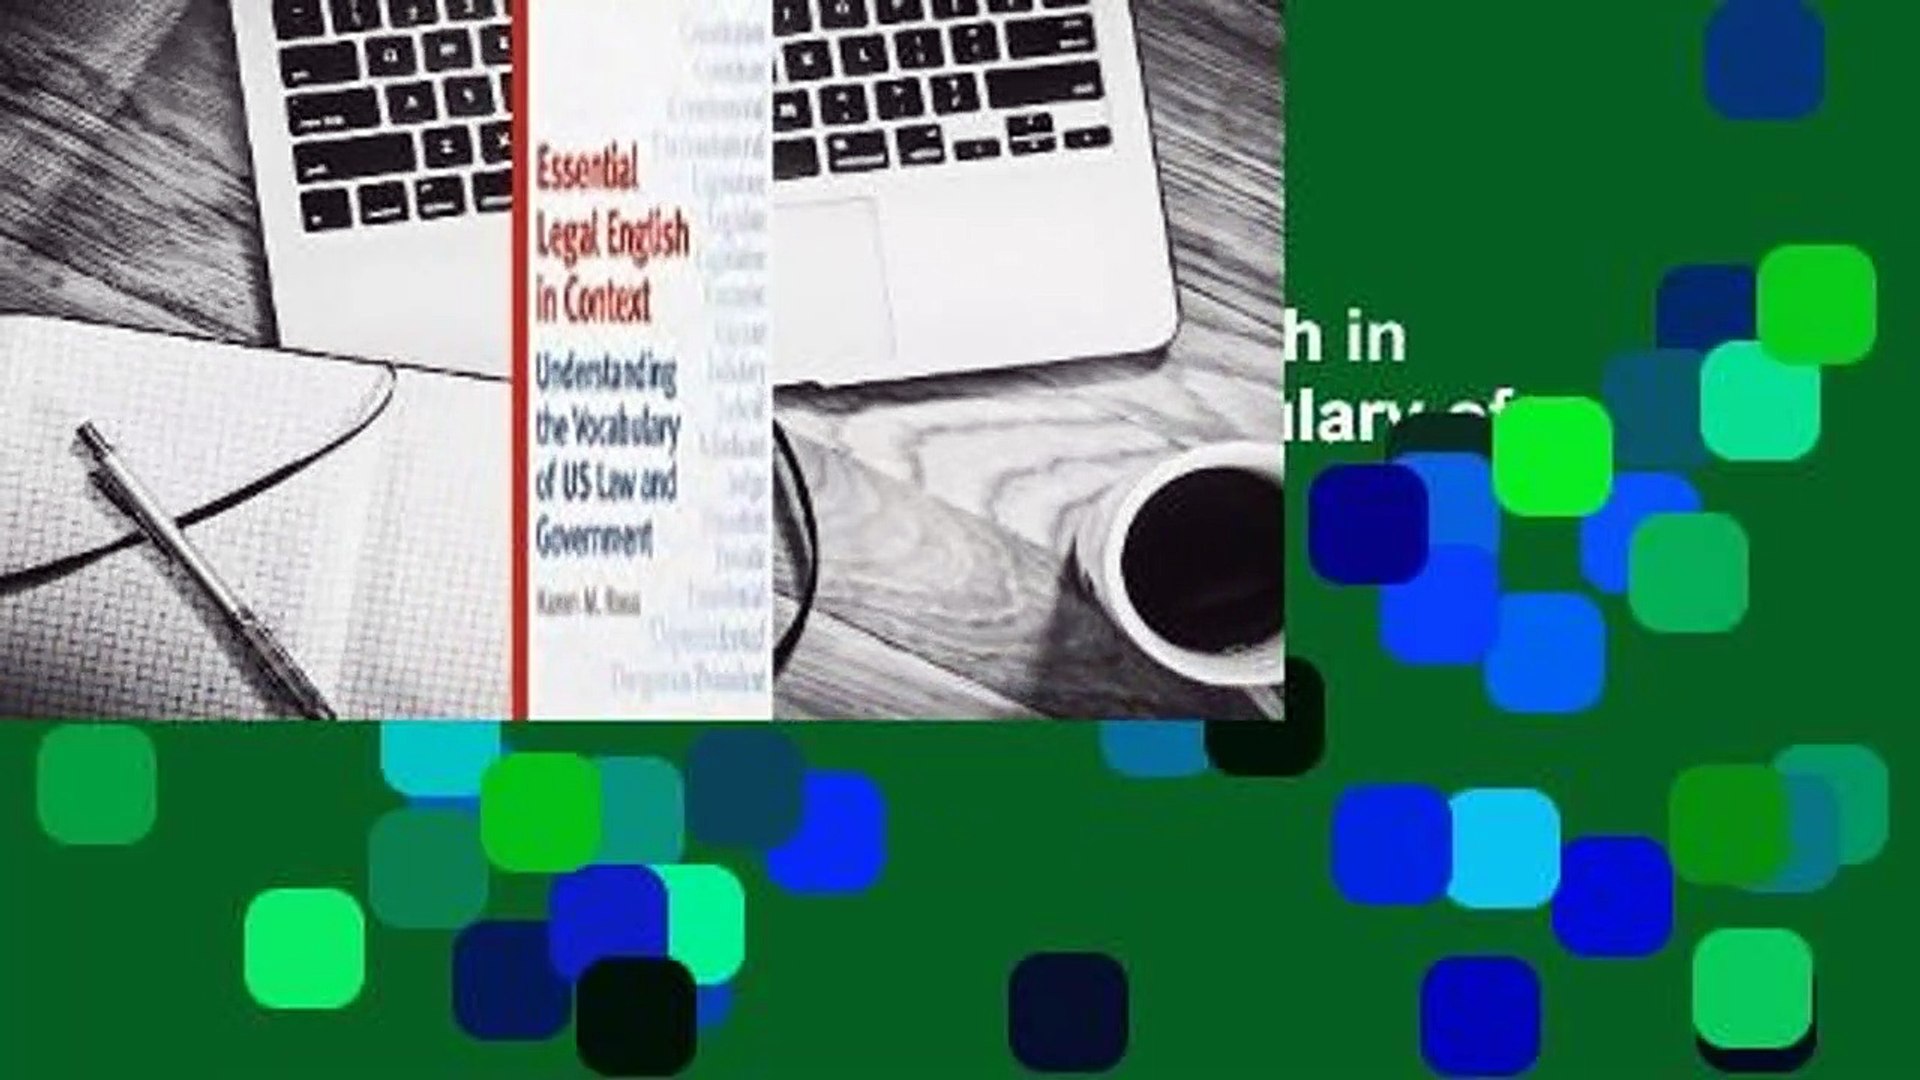 Full E-book  Essential Legal English in Context: Understanding the Vocabulary of Us Law and